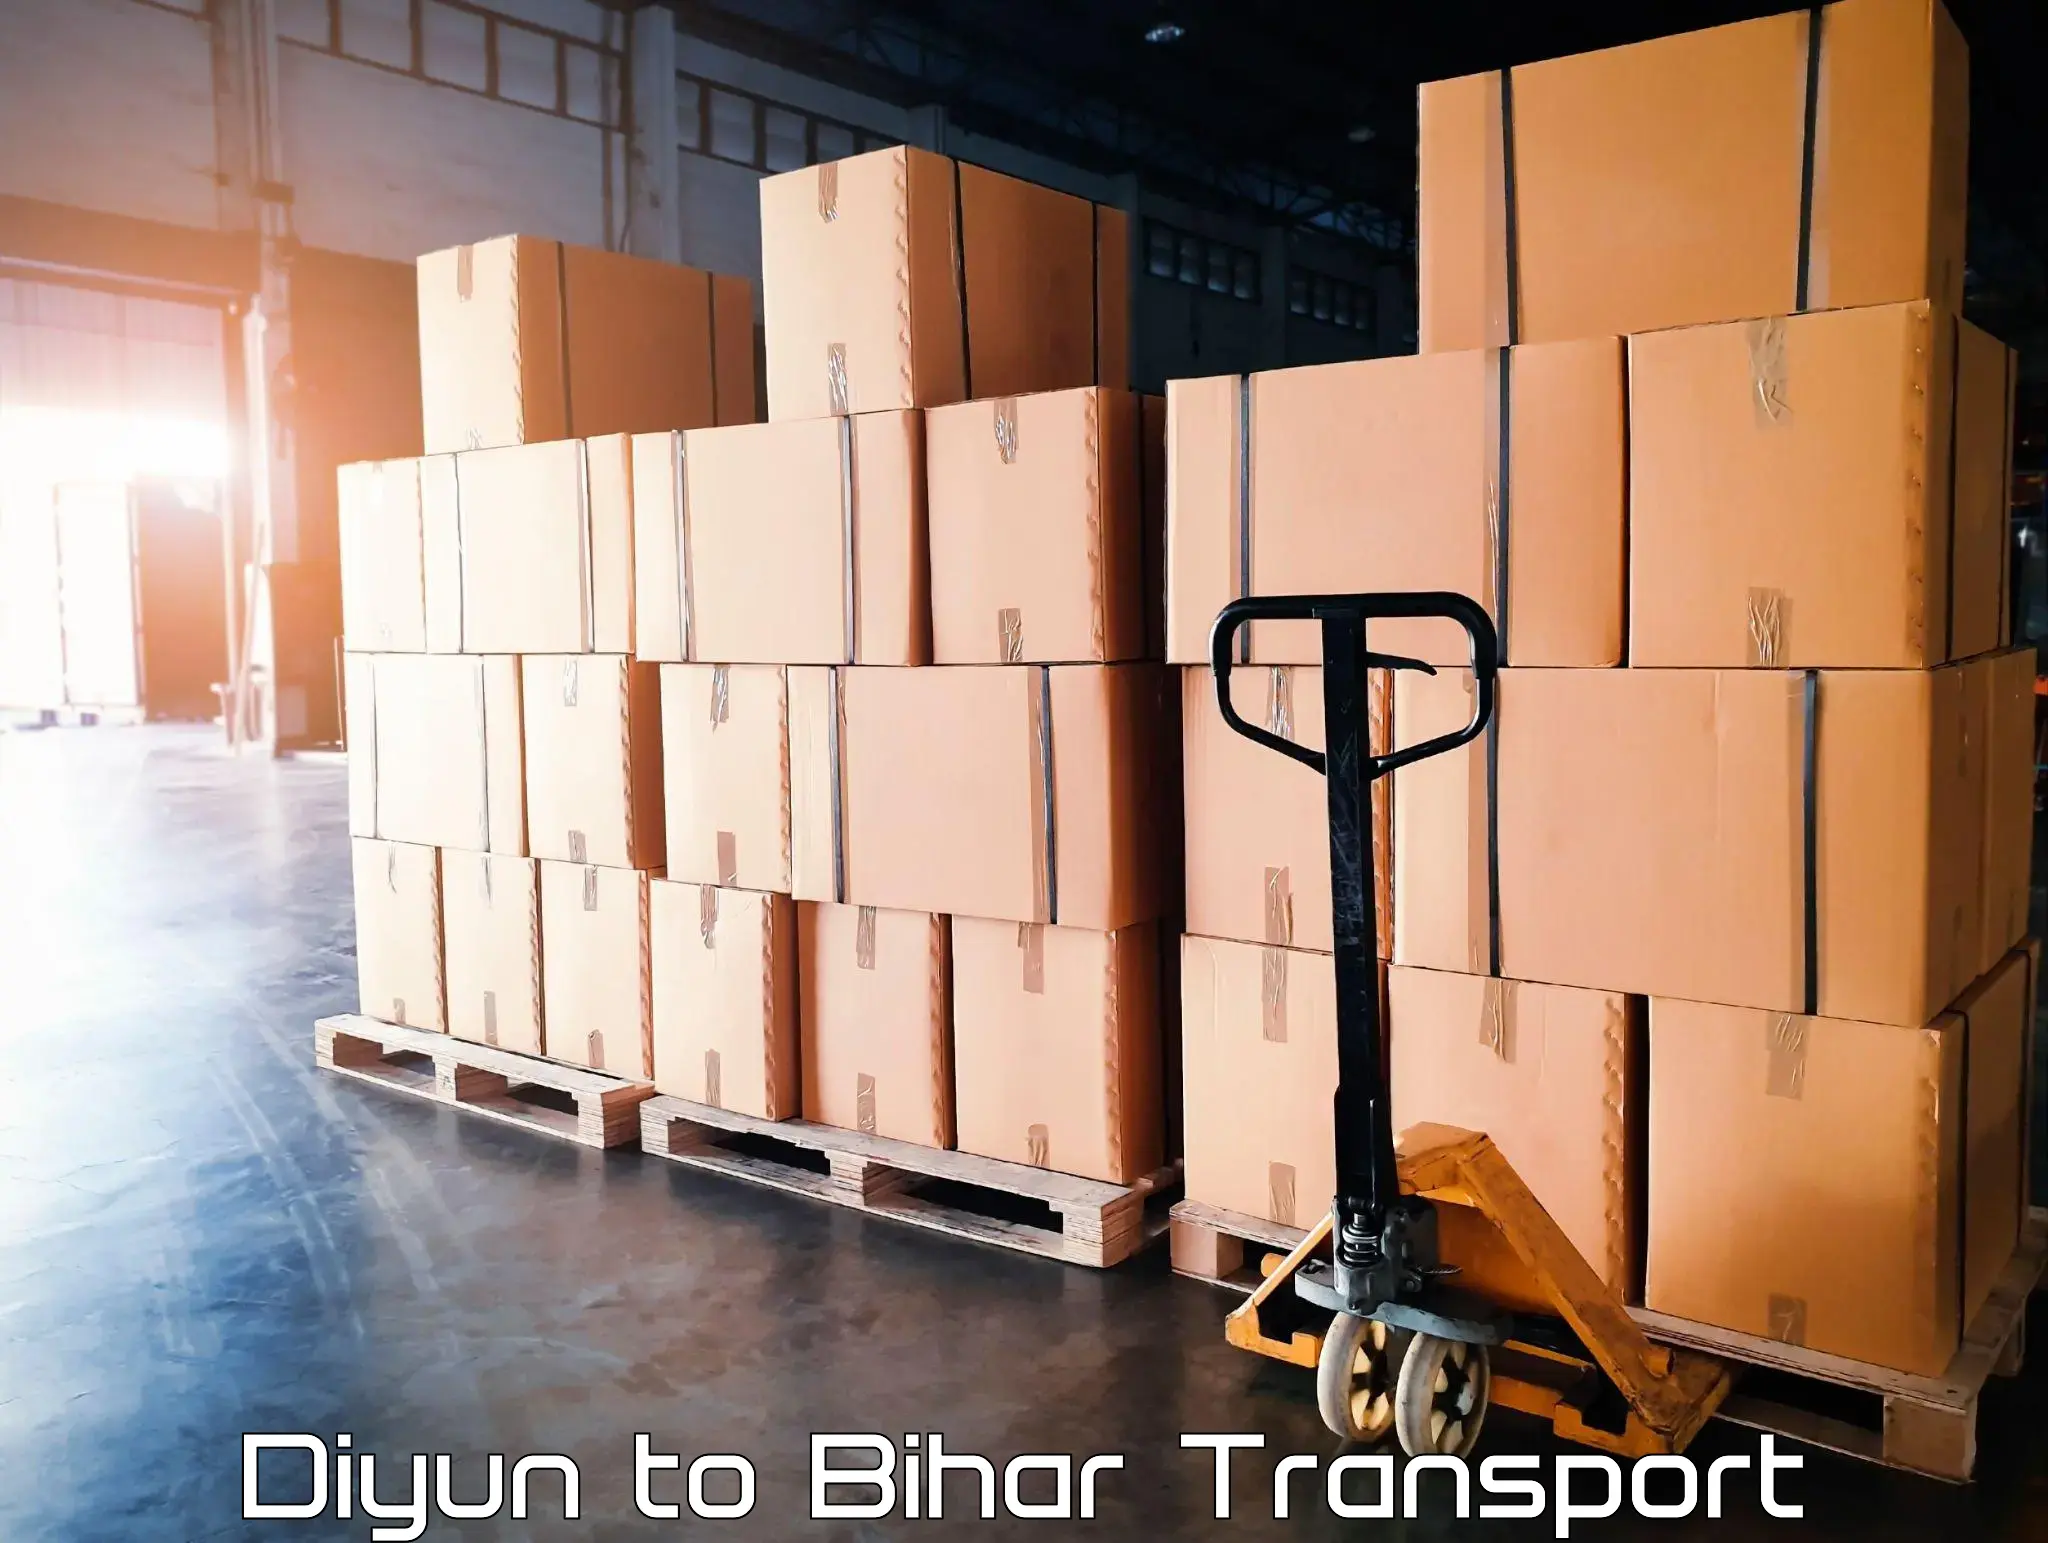 Transport bike from one state to another Diyun to Bhojpur